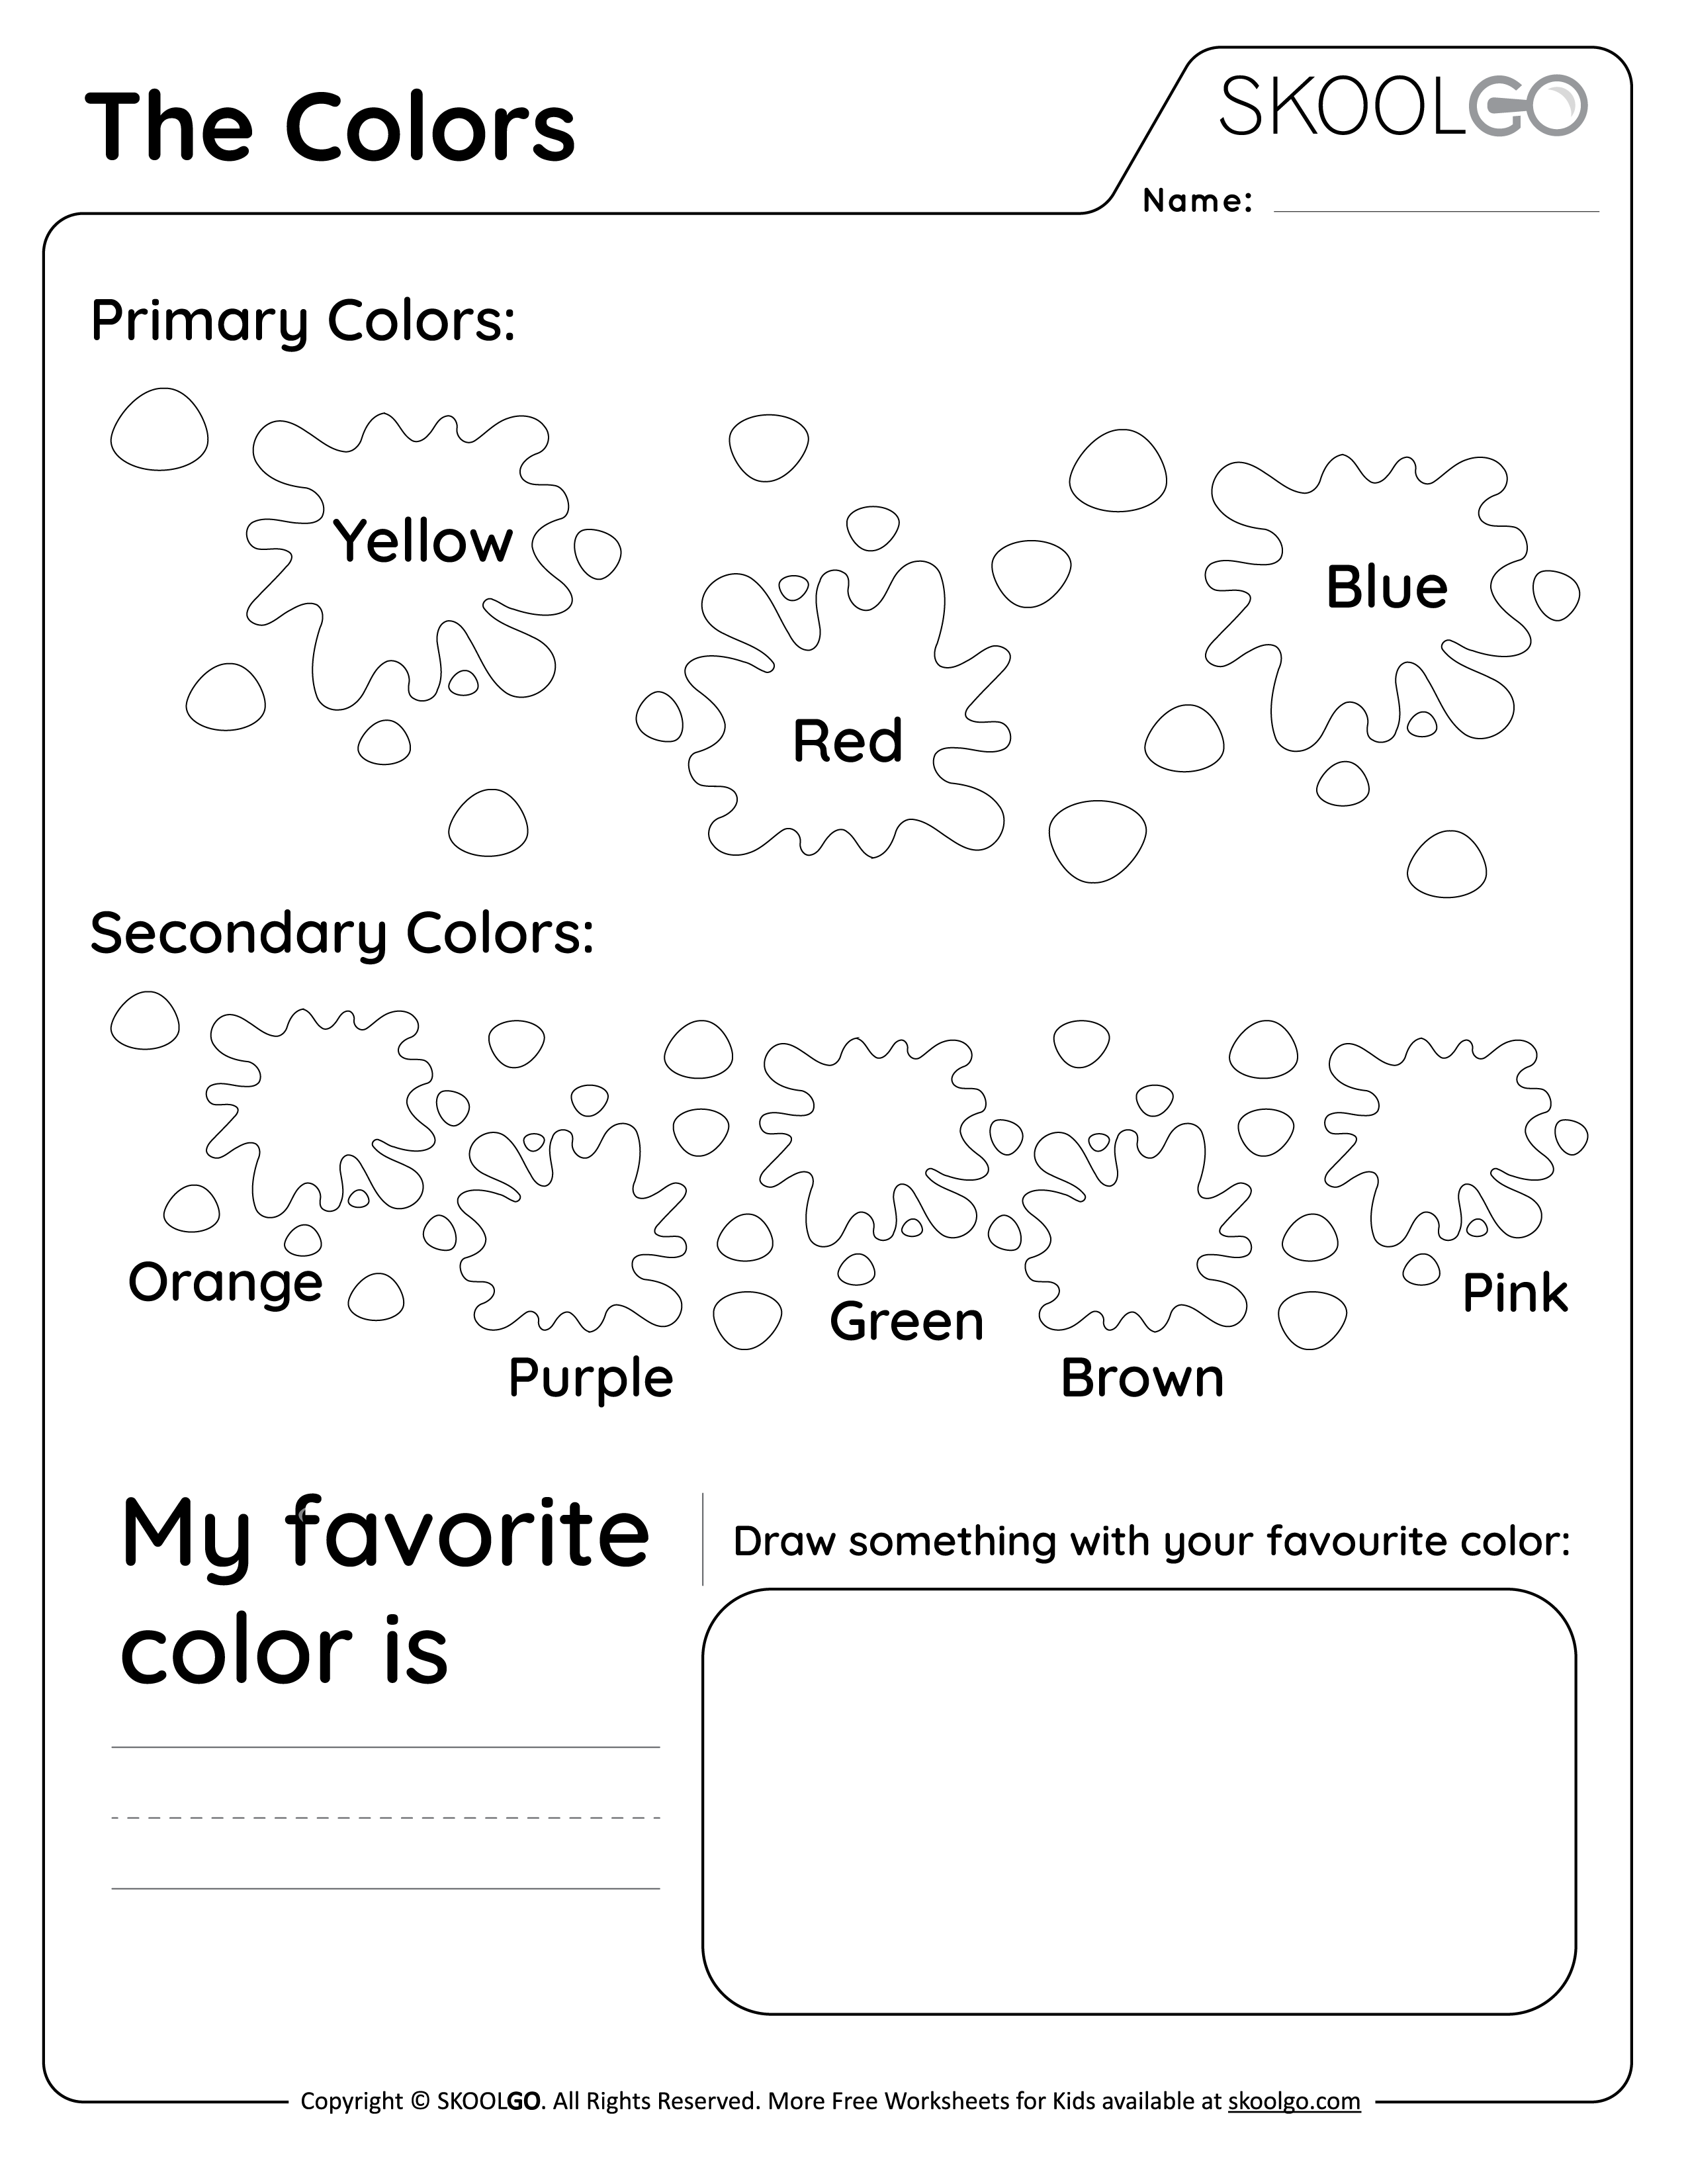 The Colors - Free Black and White Worksheet for Kids